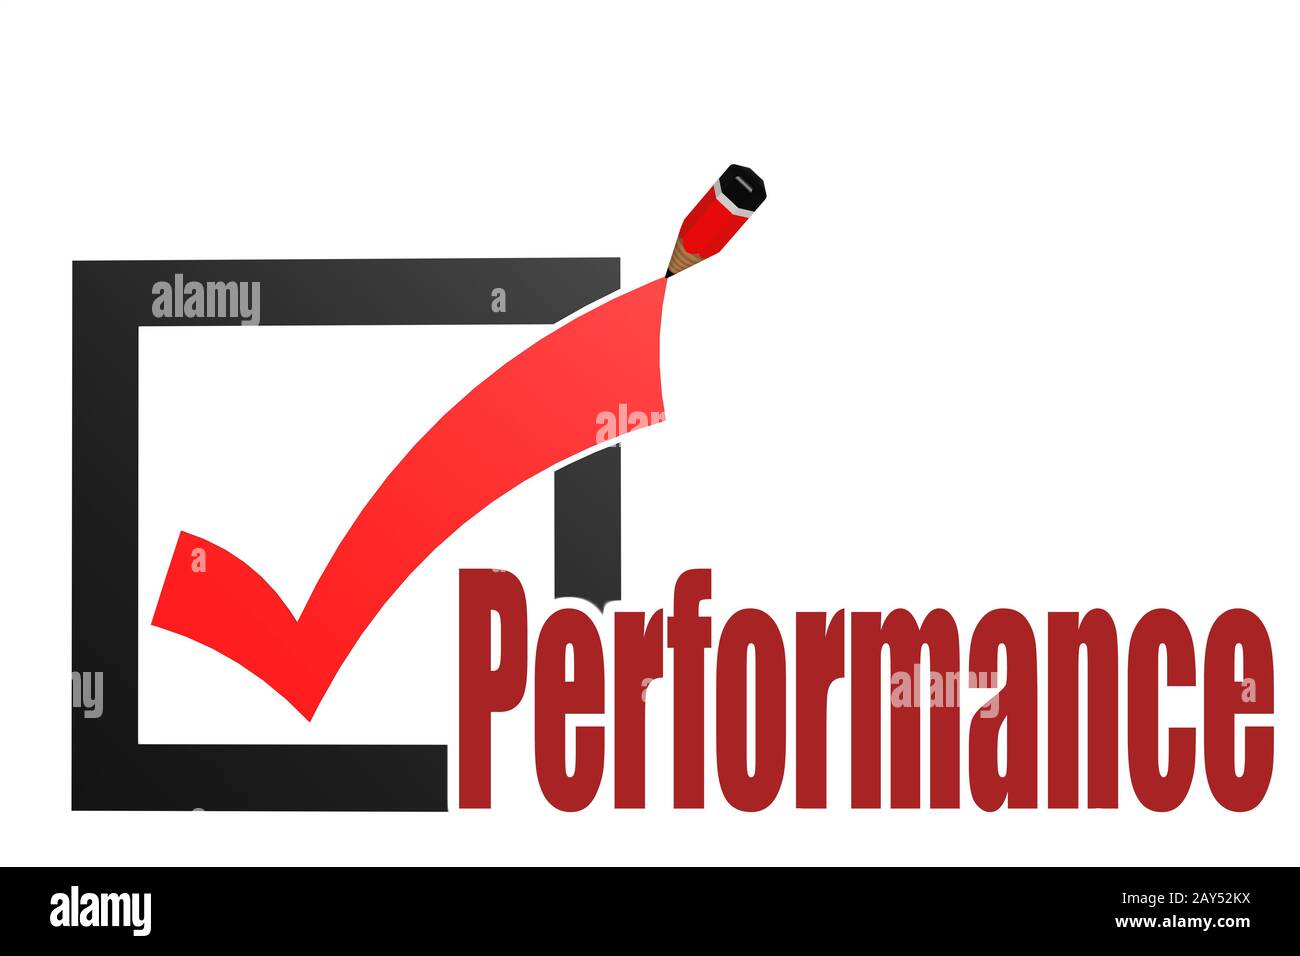 Check mark with performance word Stock Photo